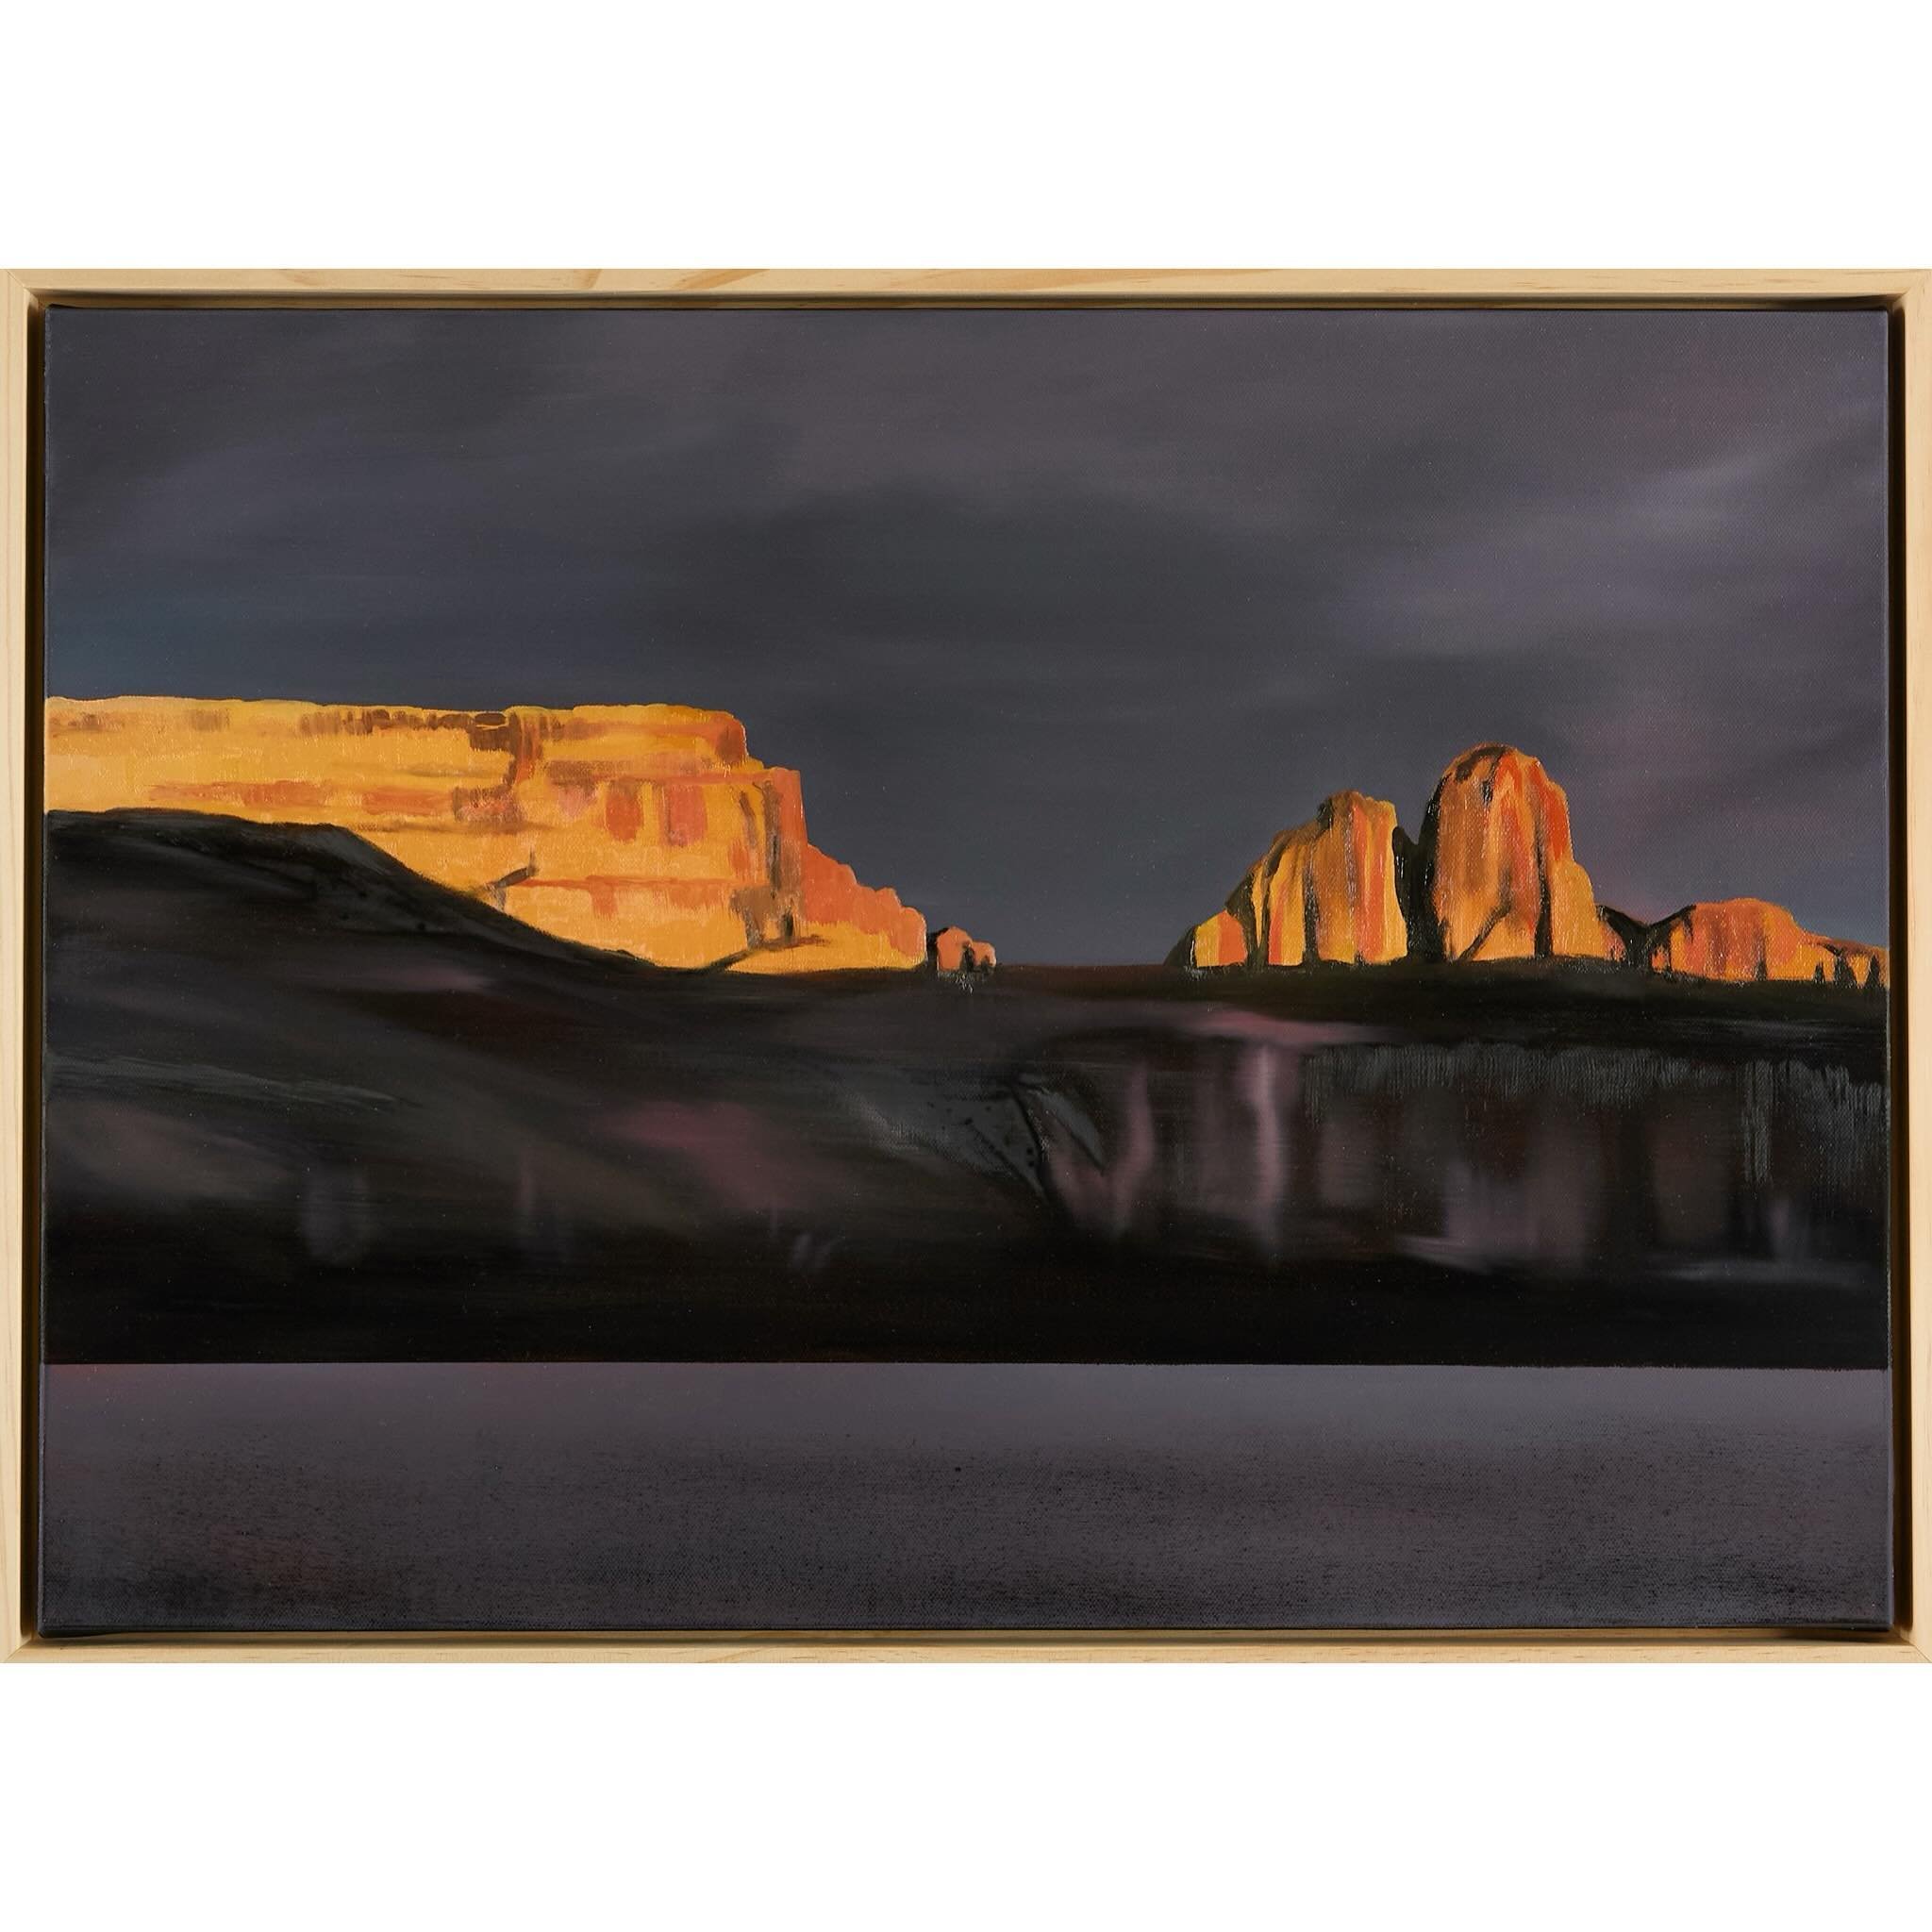 &ldquo;Padre Canyon before Glen Canyon Dam&rdquo;
Oil on canvas, 20x28 inches, framed. Women of Vision Collection 2024